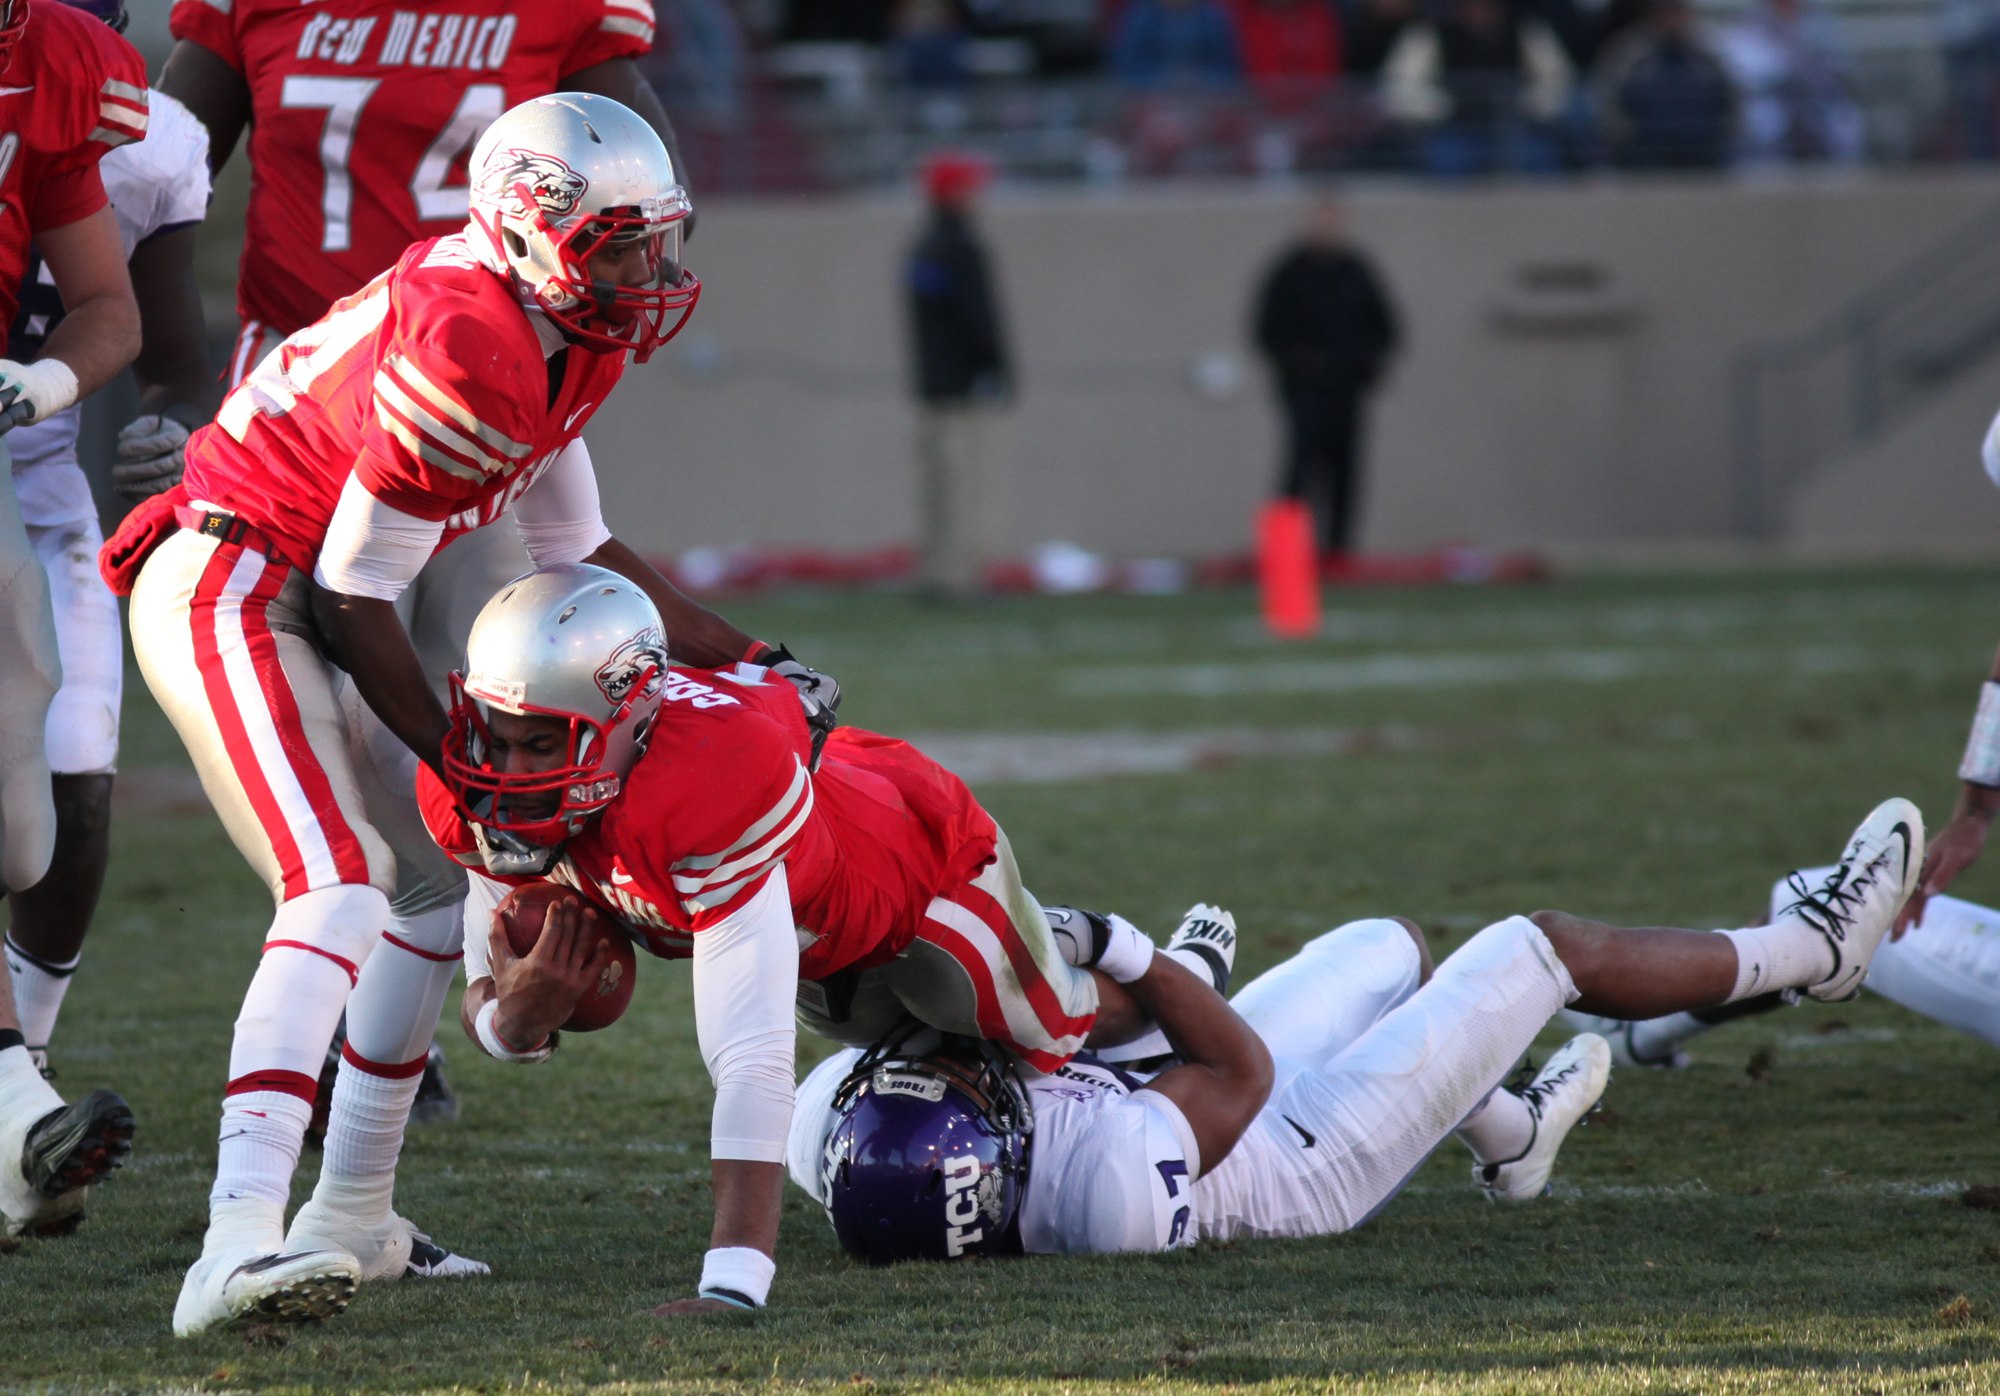 ALBUQUERQUE, NM - NOVEMBER 27: Quarterback Stump Godfrey #11 of the University of New Mexico Lobos is tackled by Jason Teague #27 of the TCU Horned Frogs on November 27, 2010 at University Stadium in Albuquerque, New Mexico. TCU won 66-17. (Photo by Eric